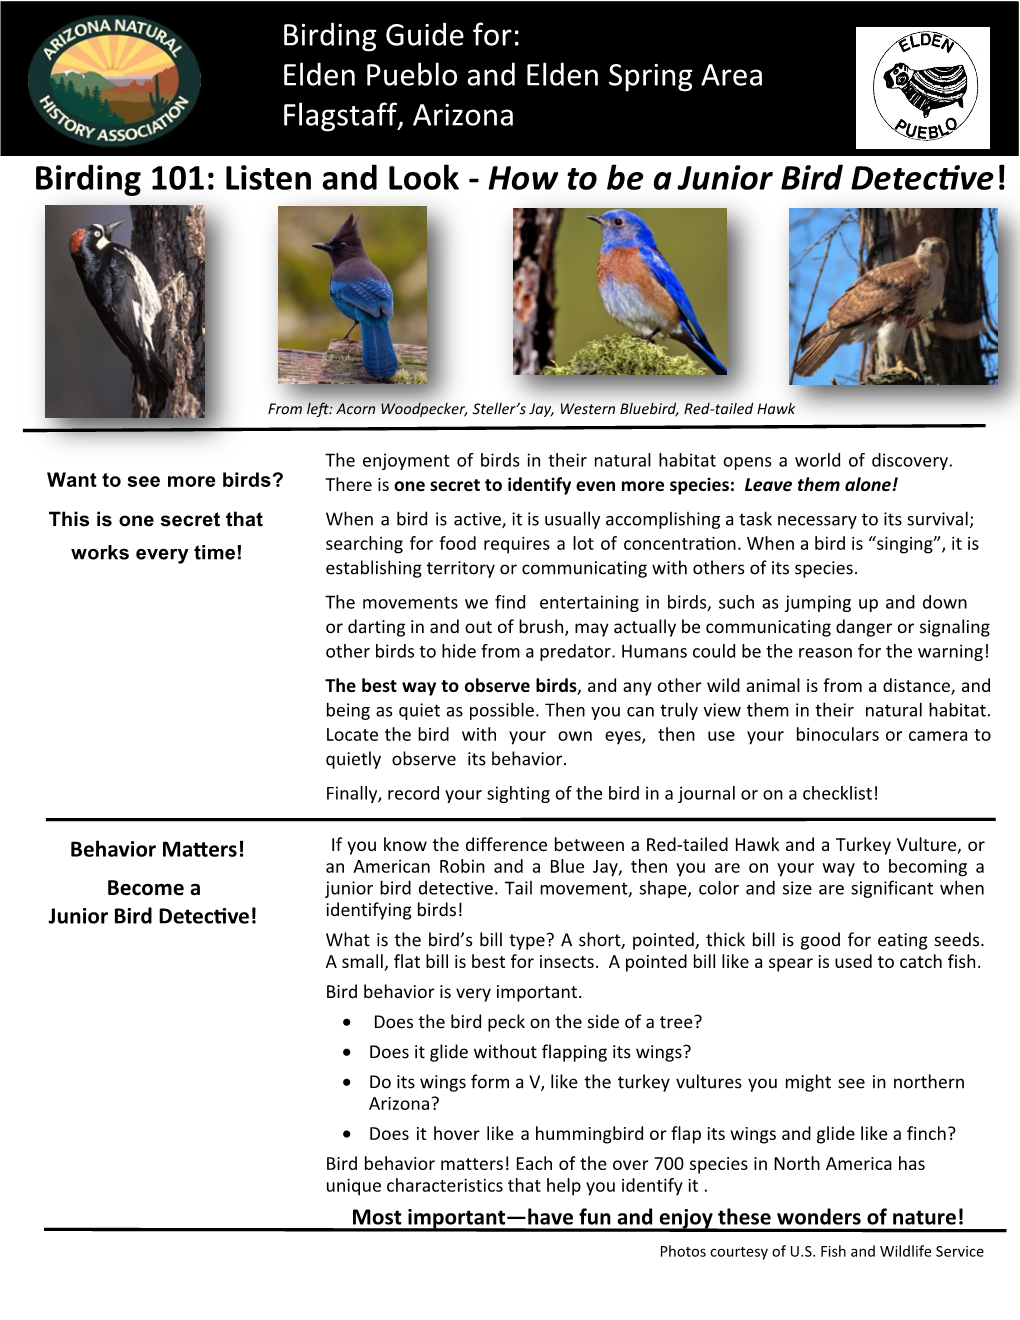 Listen and Look - How to Be a Junior Bird Detective!